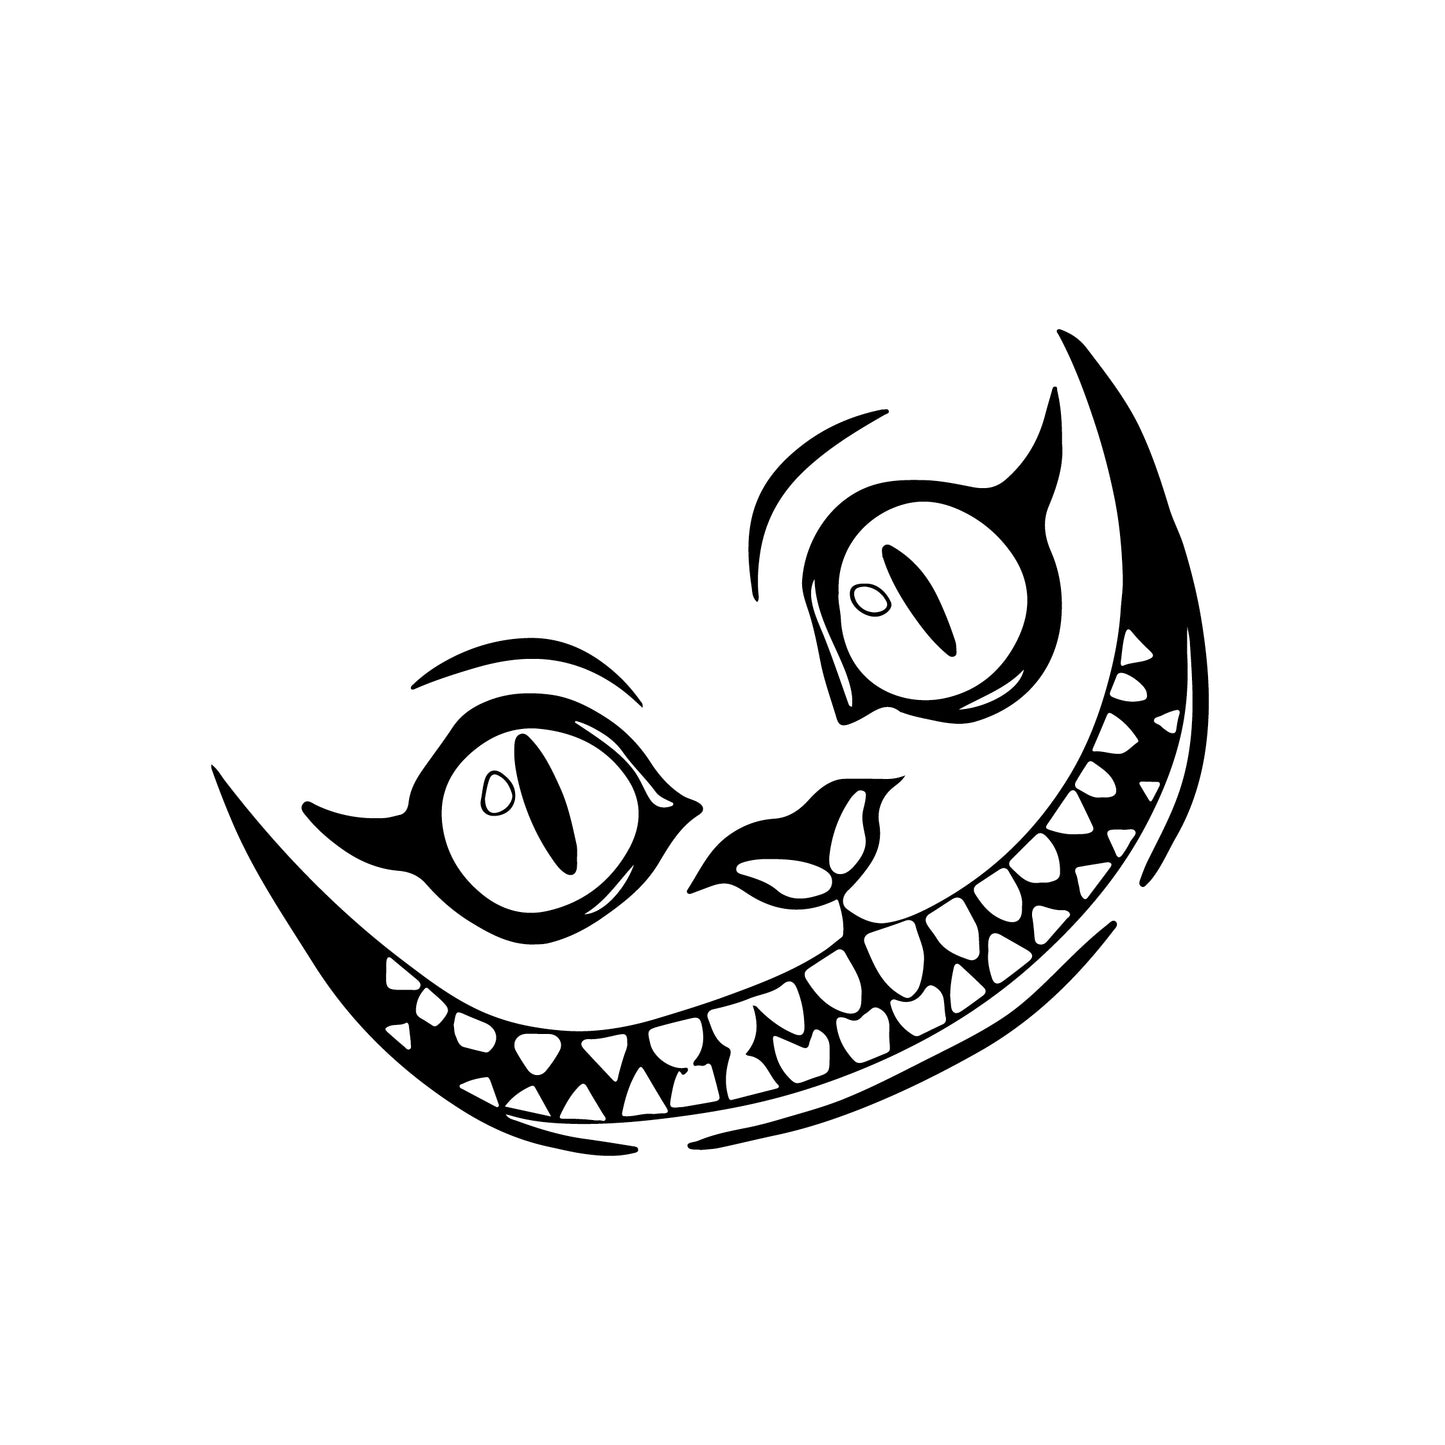 Cheshire Cat - Wall decal vinyl graphic